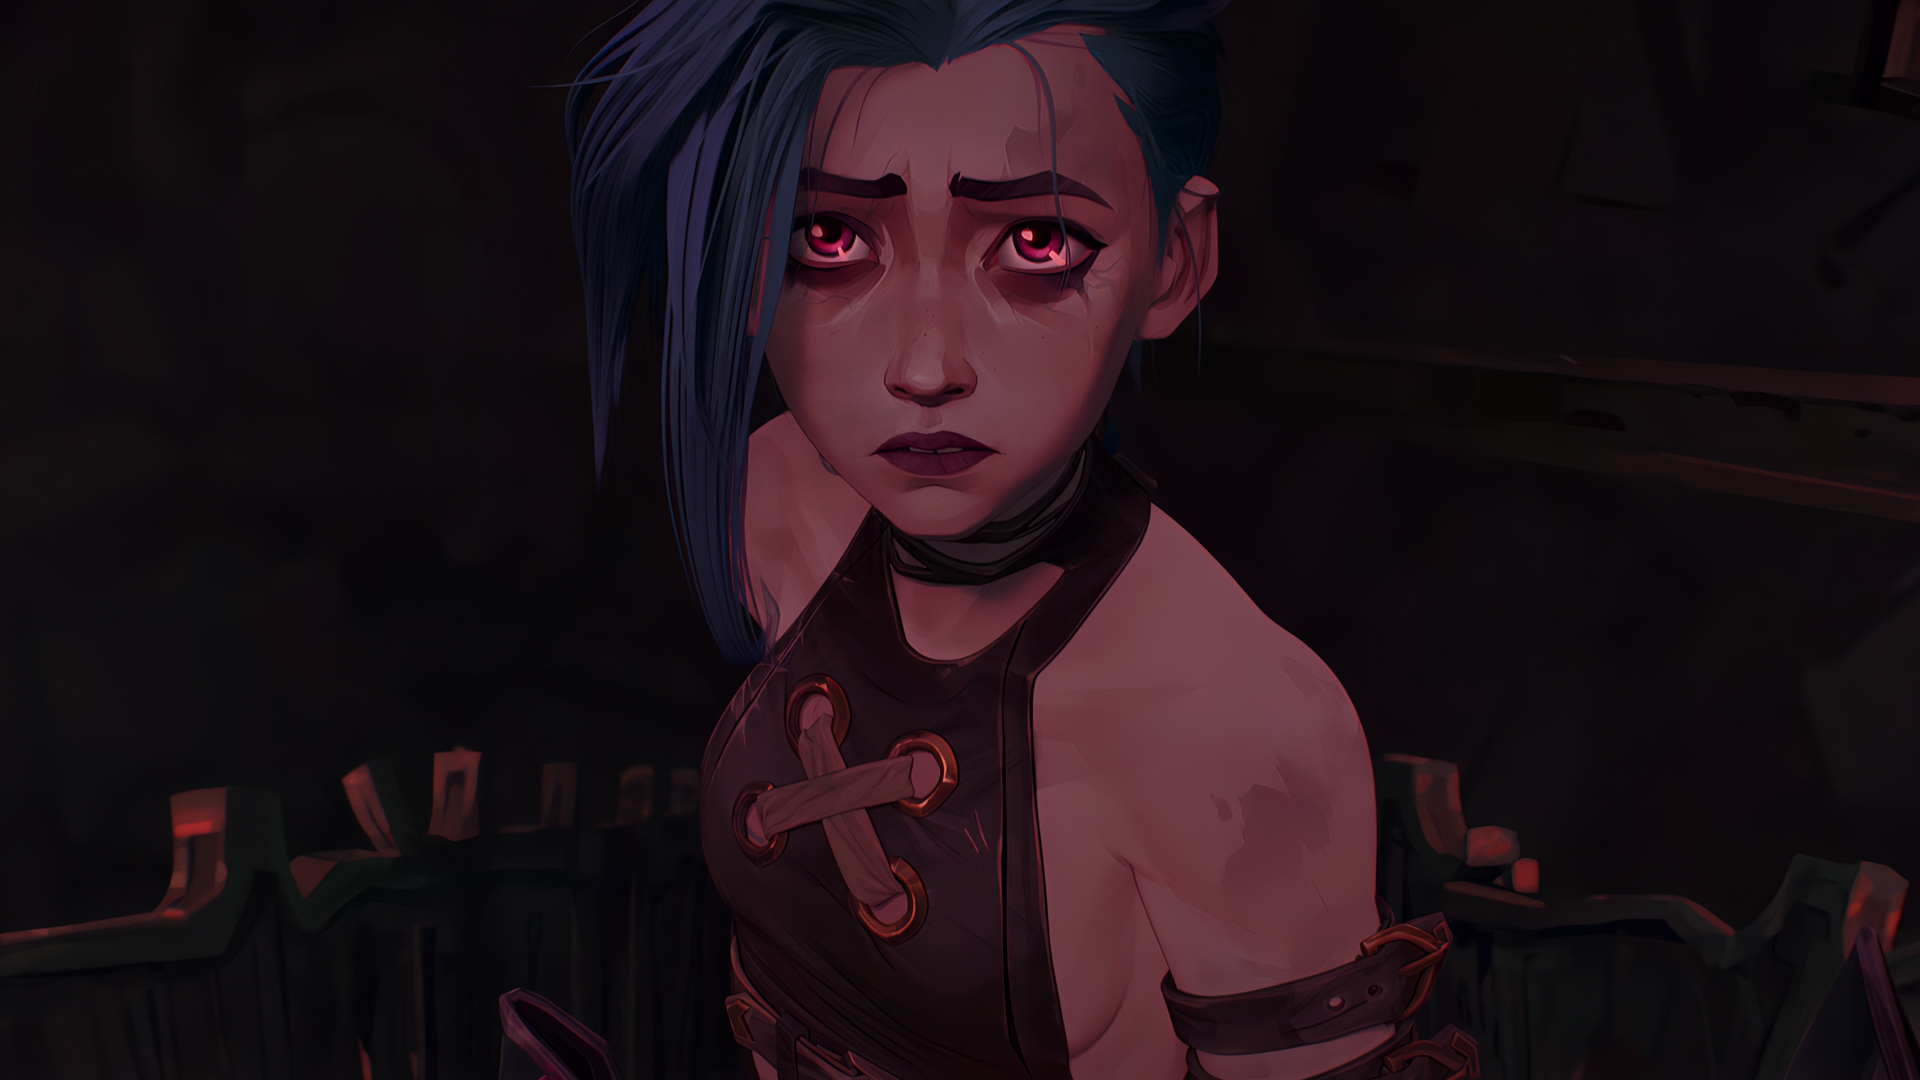 HD wallpaper blue haired anime character illustration Jinx League of  Legends  Wallpaper Flare